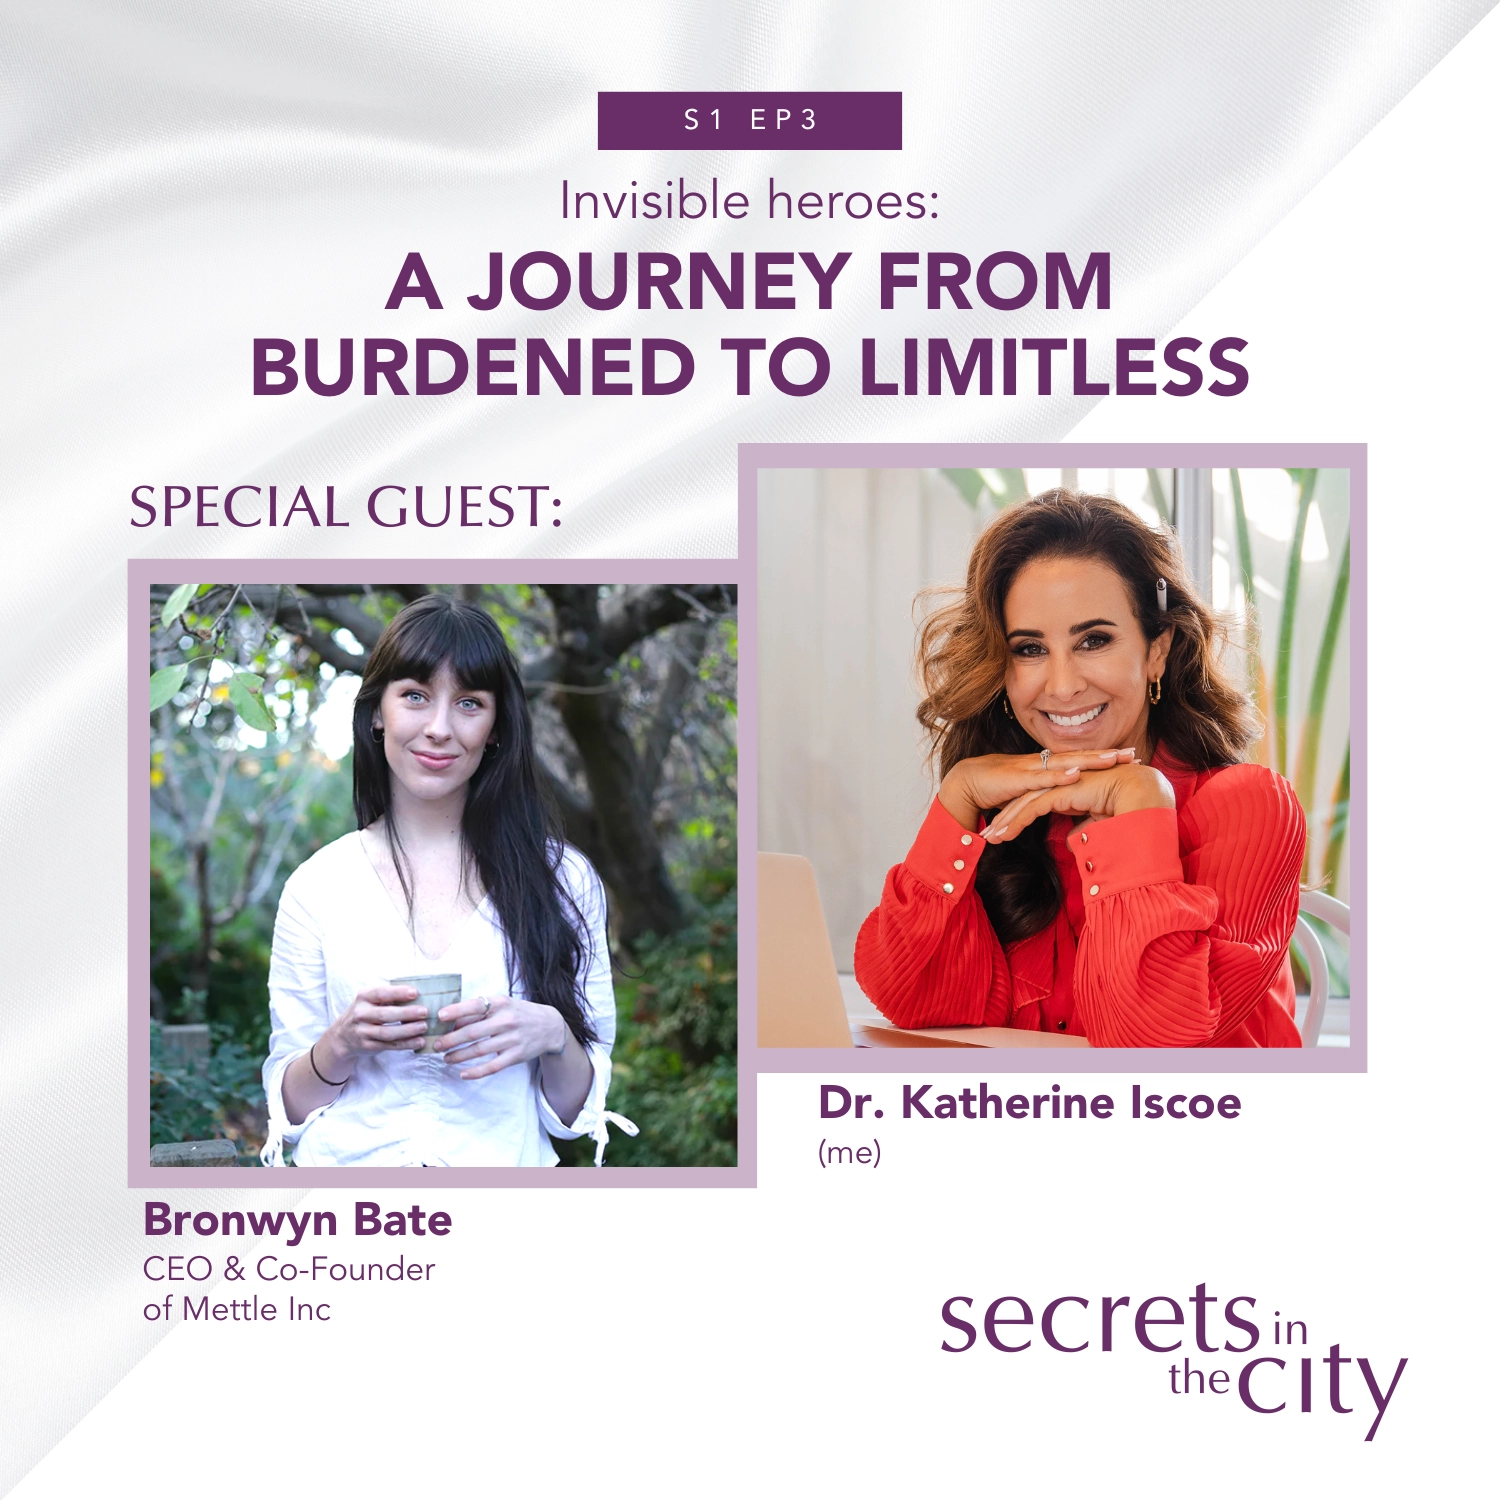 A Journey From Burdened to Limitless - Secrets in the City podcast cover featuring photos of Bronwyn Bate and Dr. Katherine Iscoe